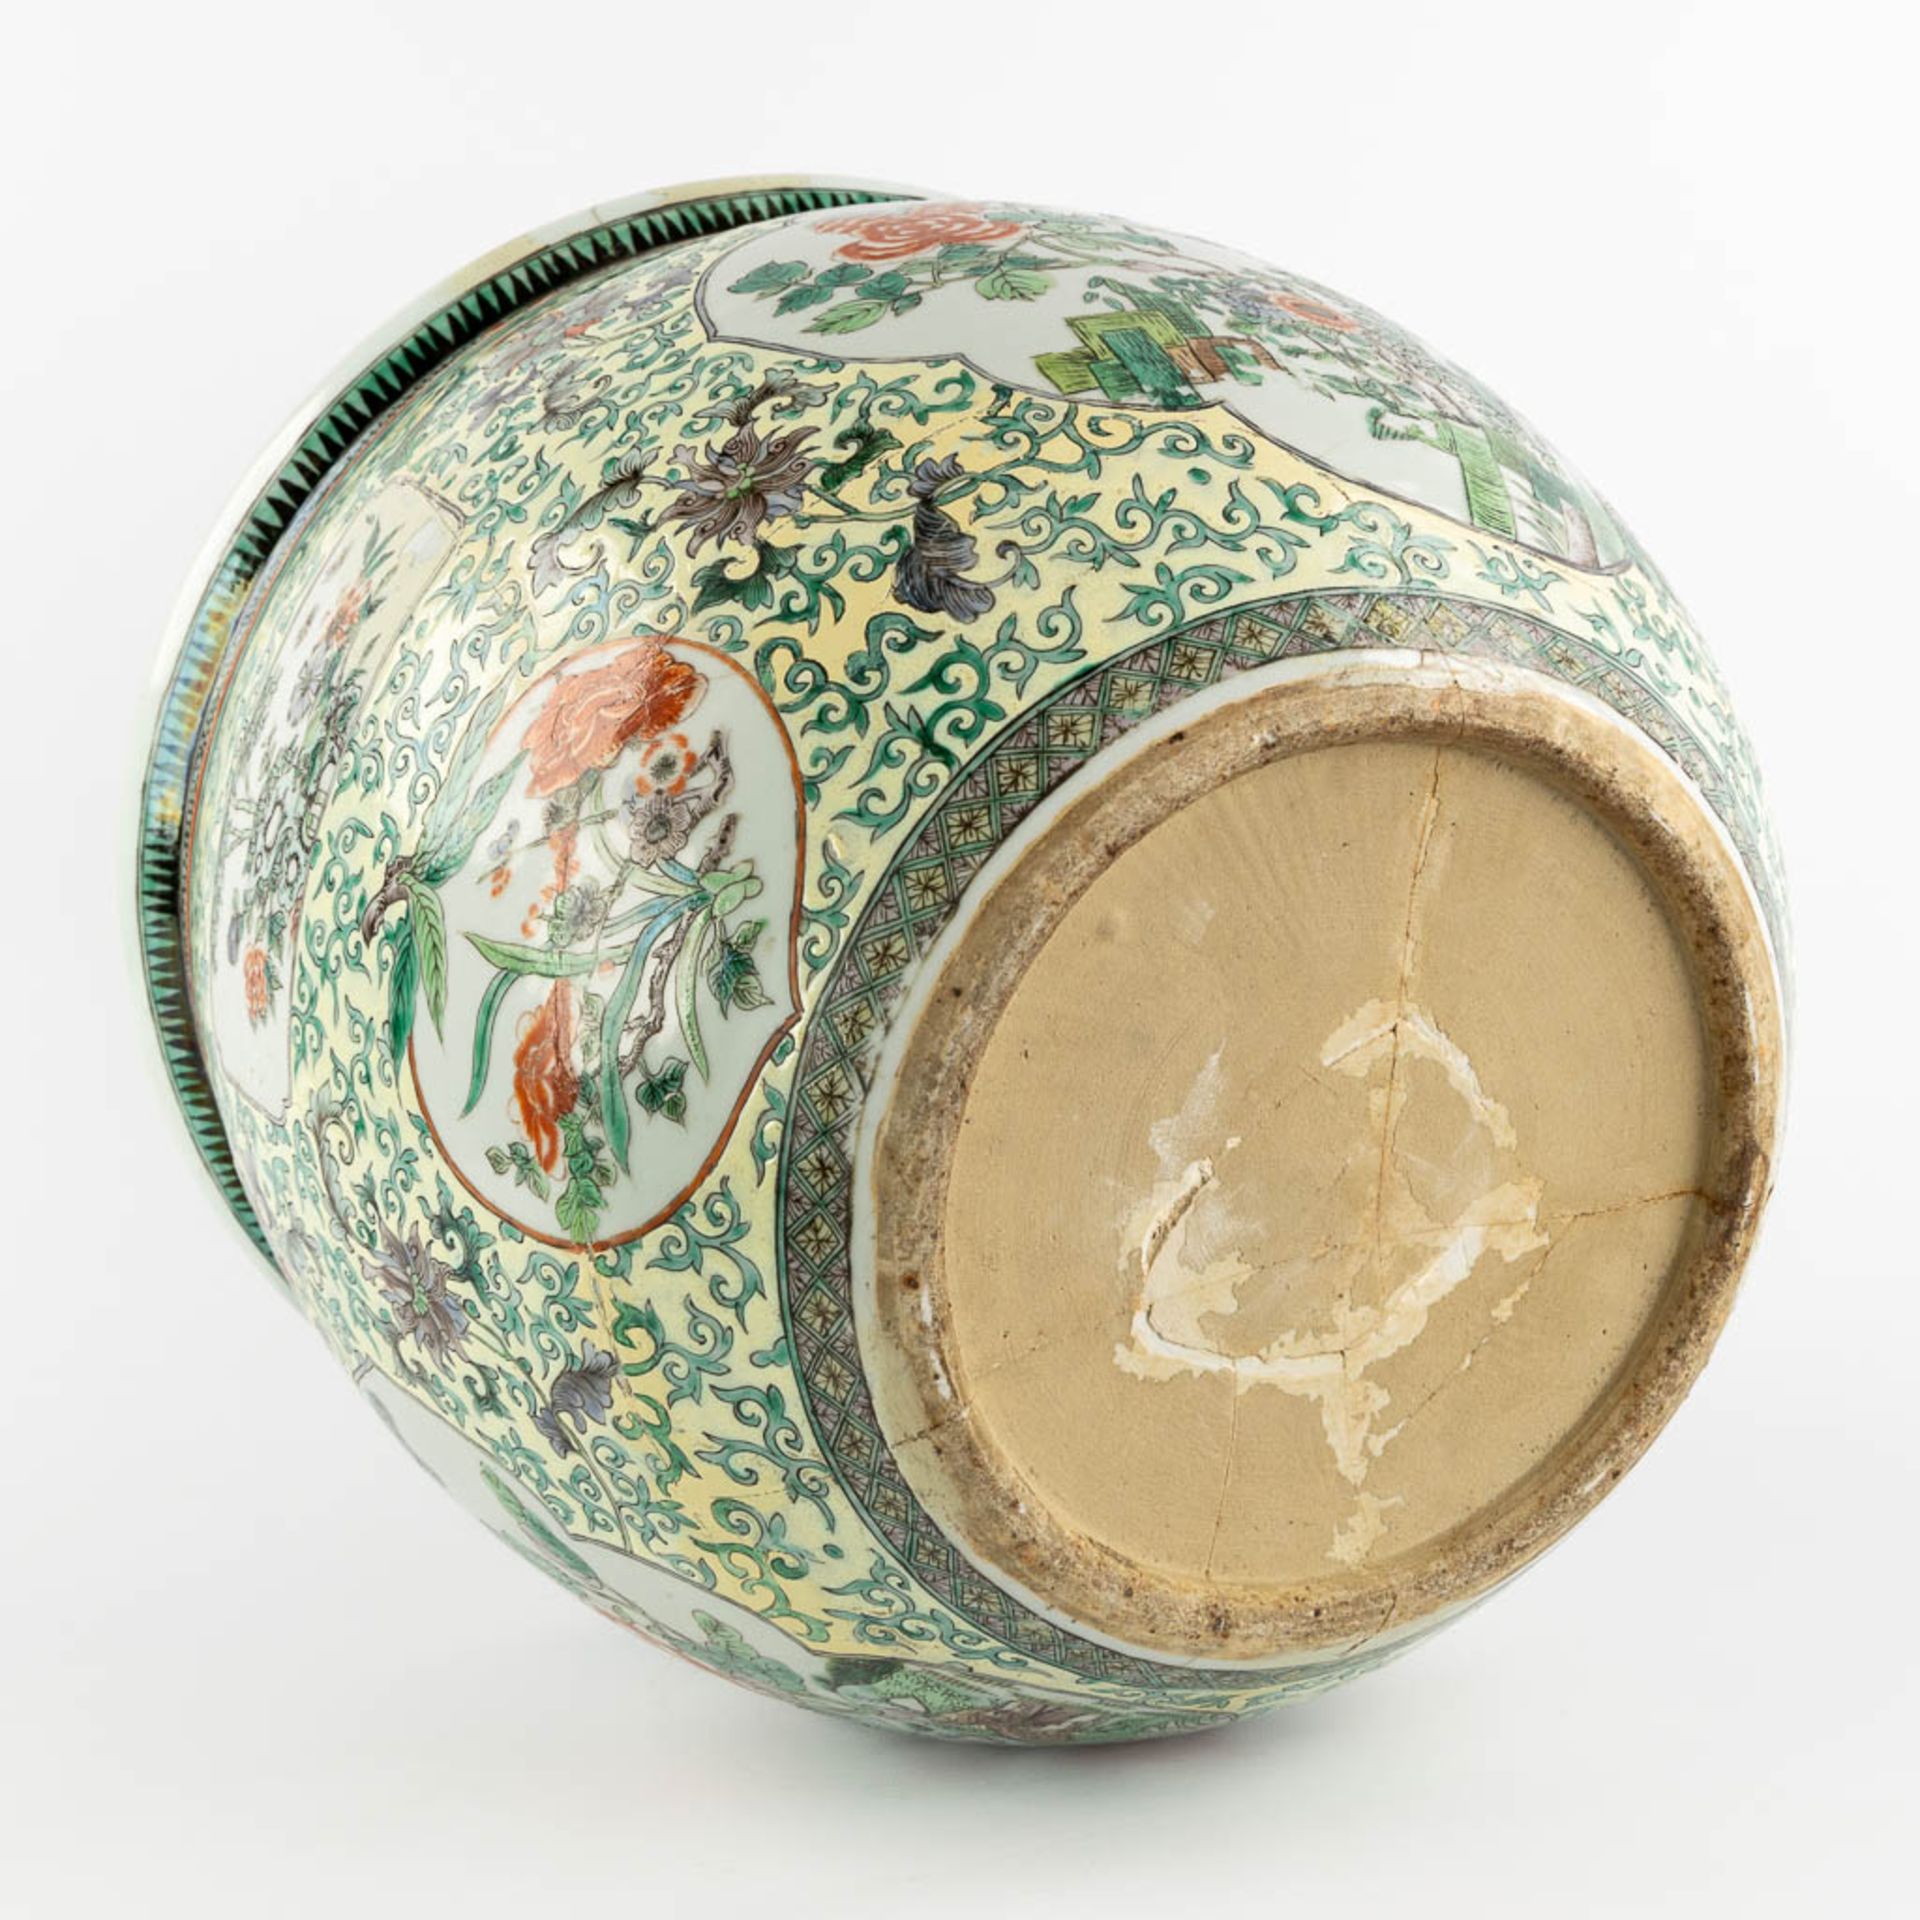 A Large Chinese Cache-Pot, Famille Verte decorated with fauna and flora. 19th C. (H:35 x D:40 cm) - Image 14 of 14